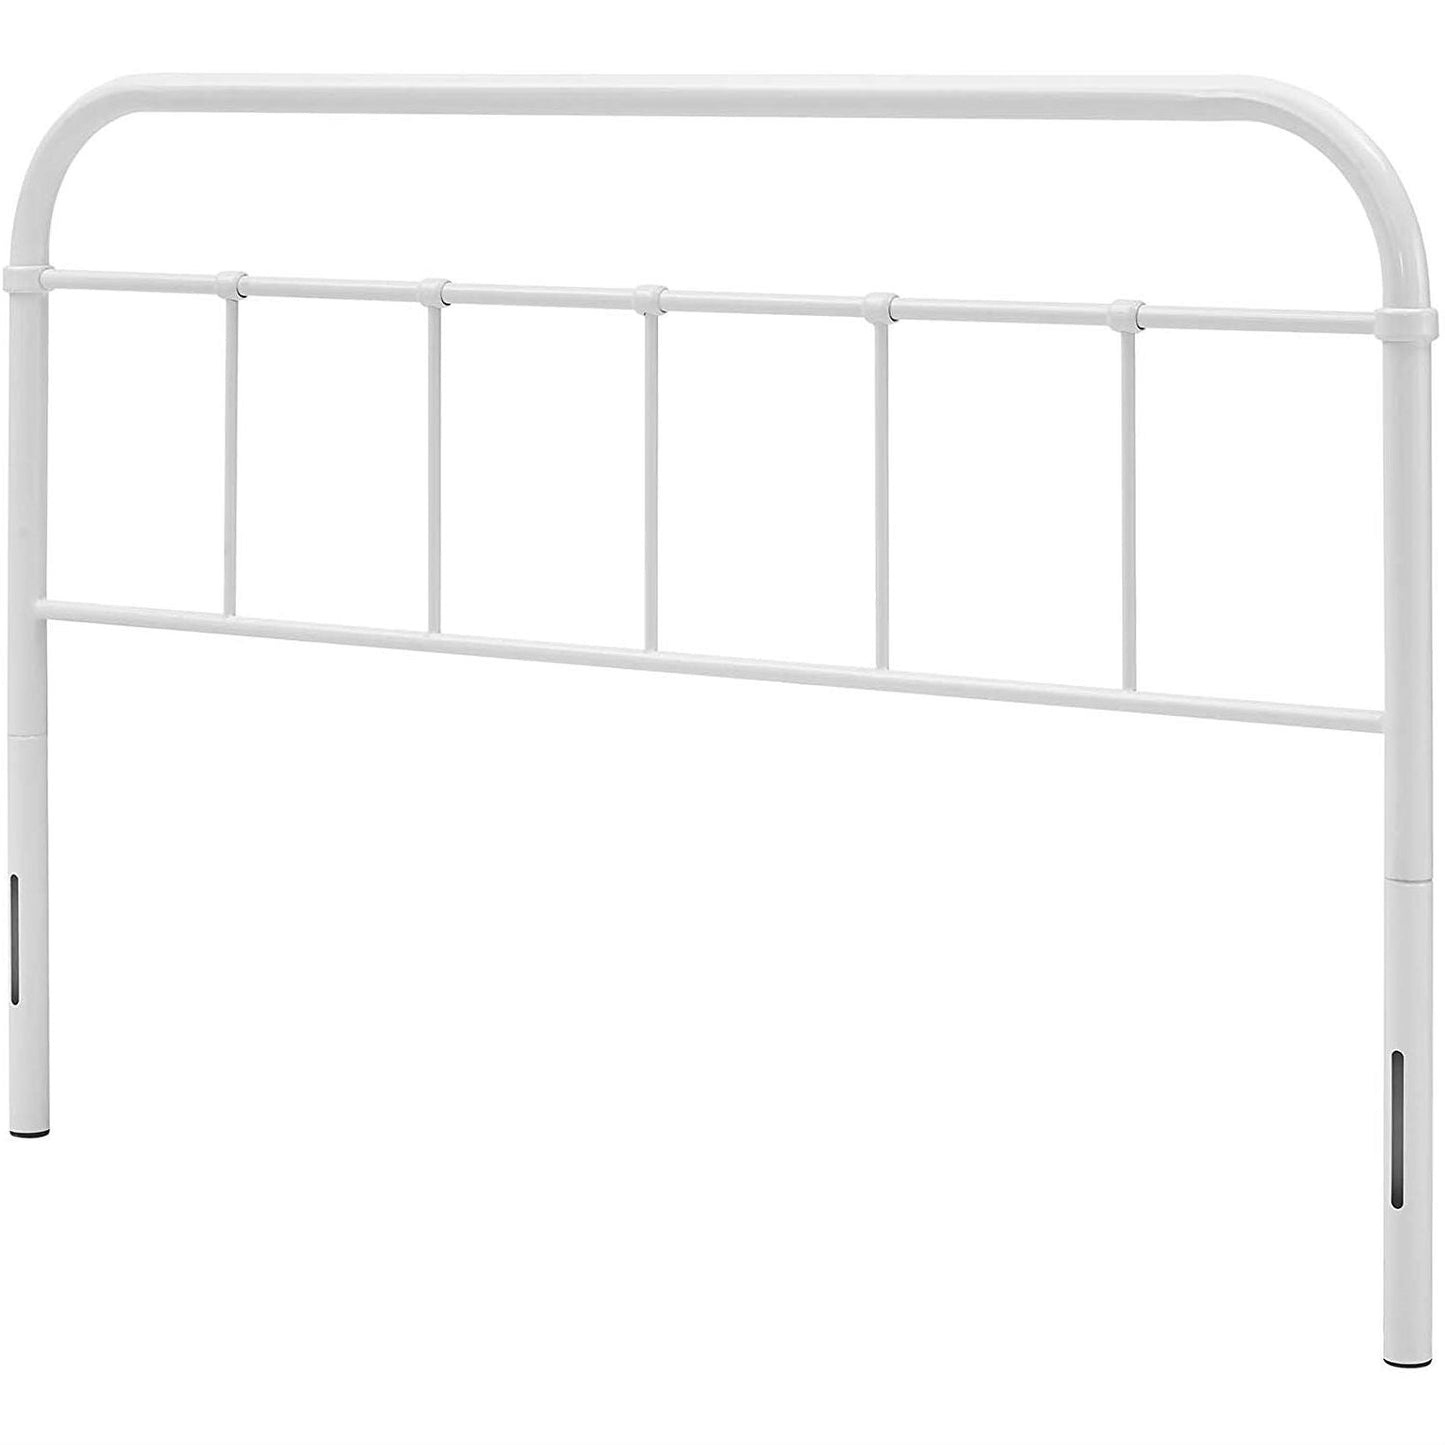 Bedroom > Headboards - Full Size Vintage White Metal Headboard With Round Corners